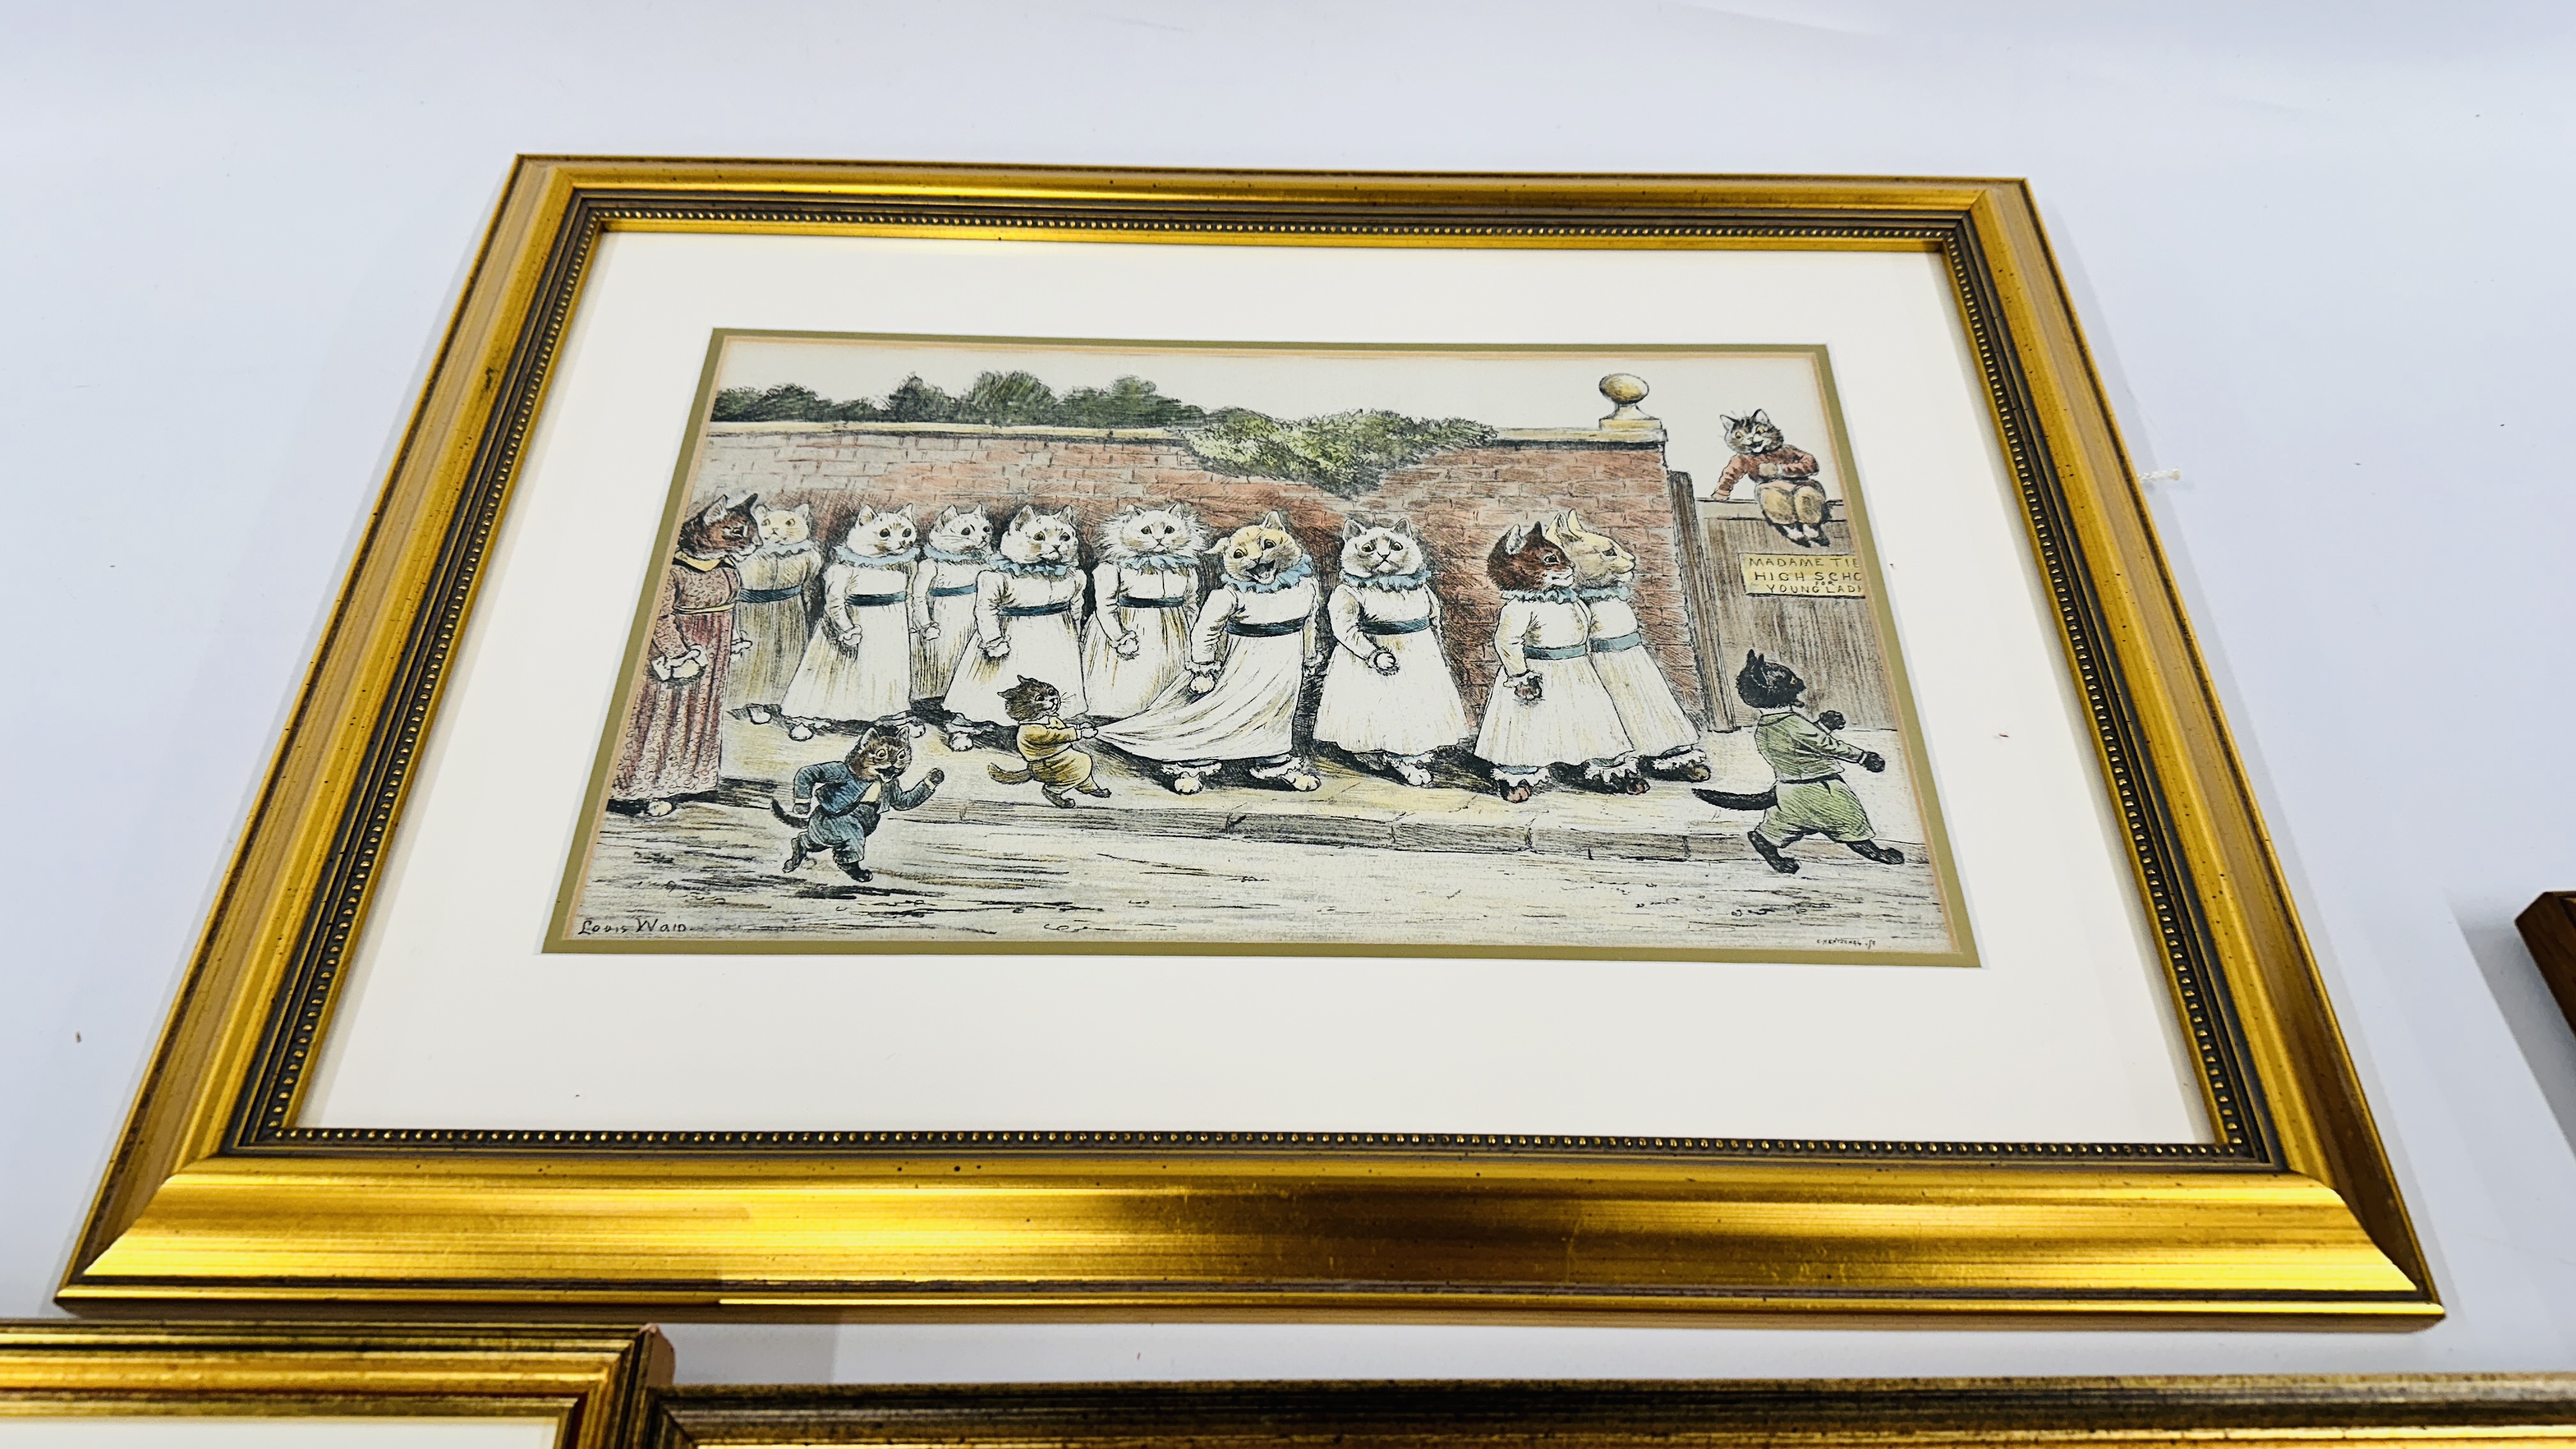 A GROUP OF 9 FRAMED CAT PRINTS TO INCLUDE 6 REPRODUCTION LOUIS WAIN EXAMPLES ETC. - Image 6 of 6